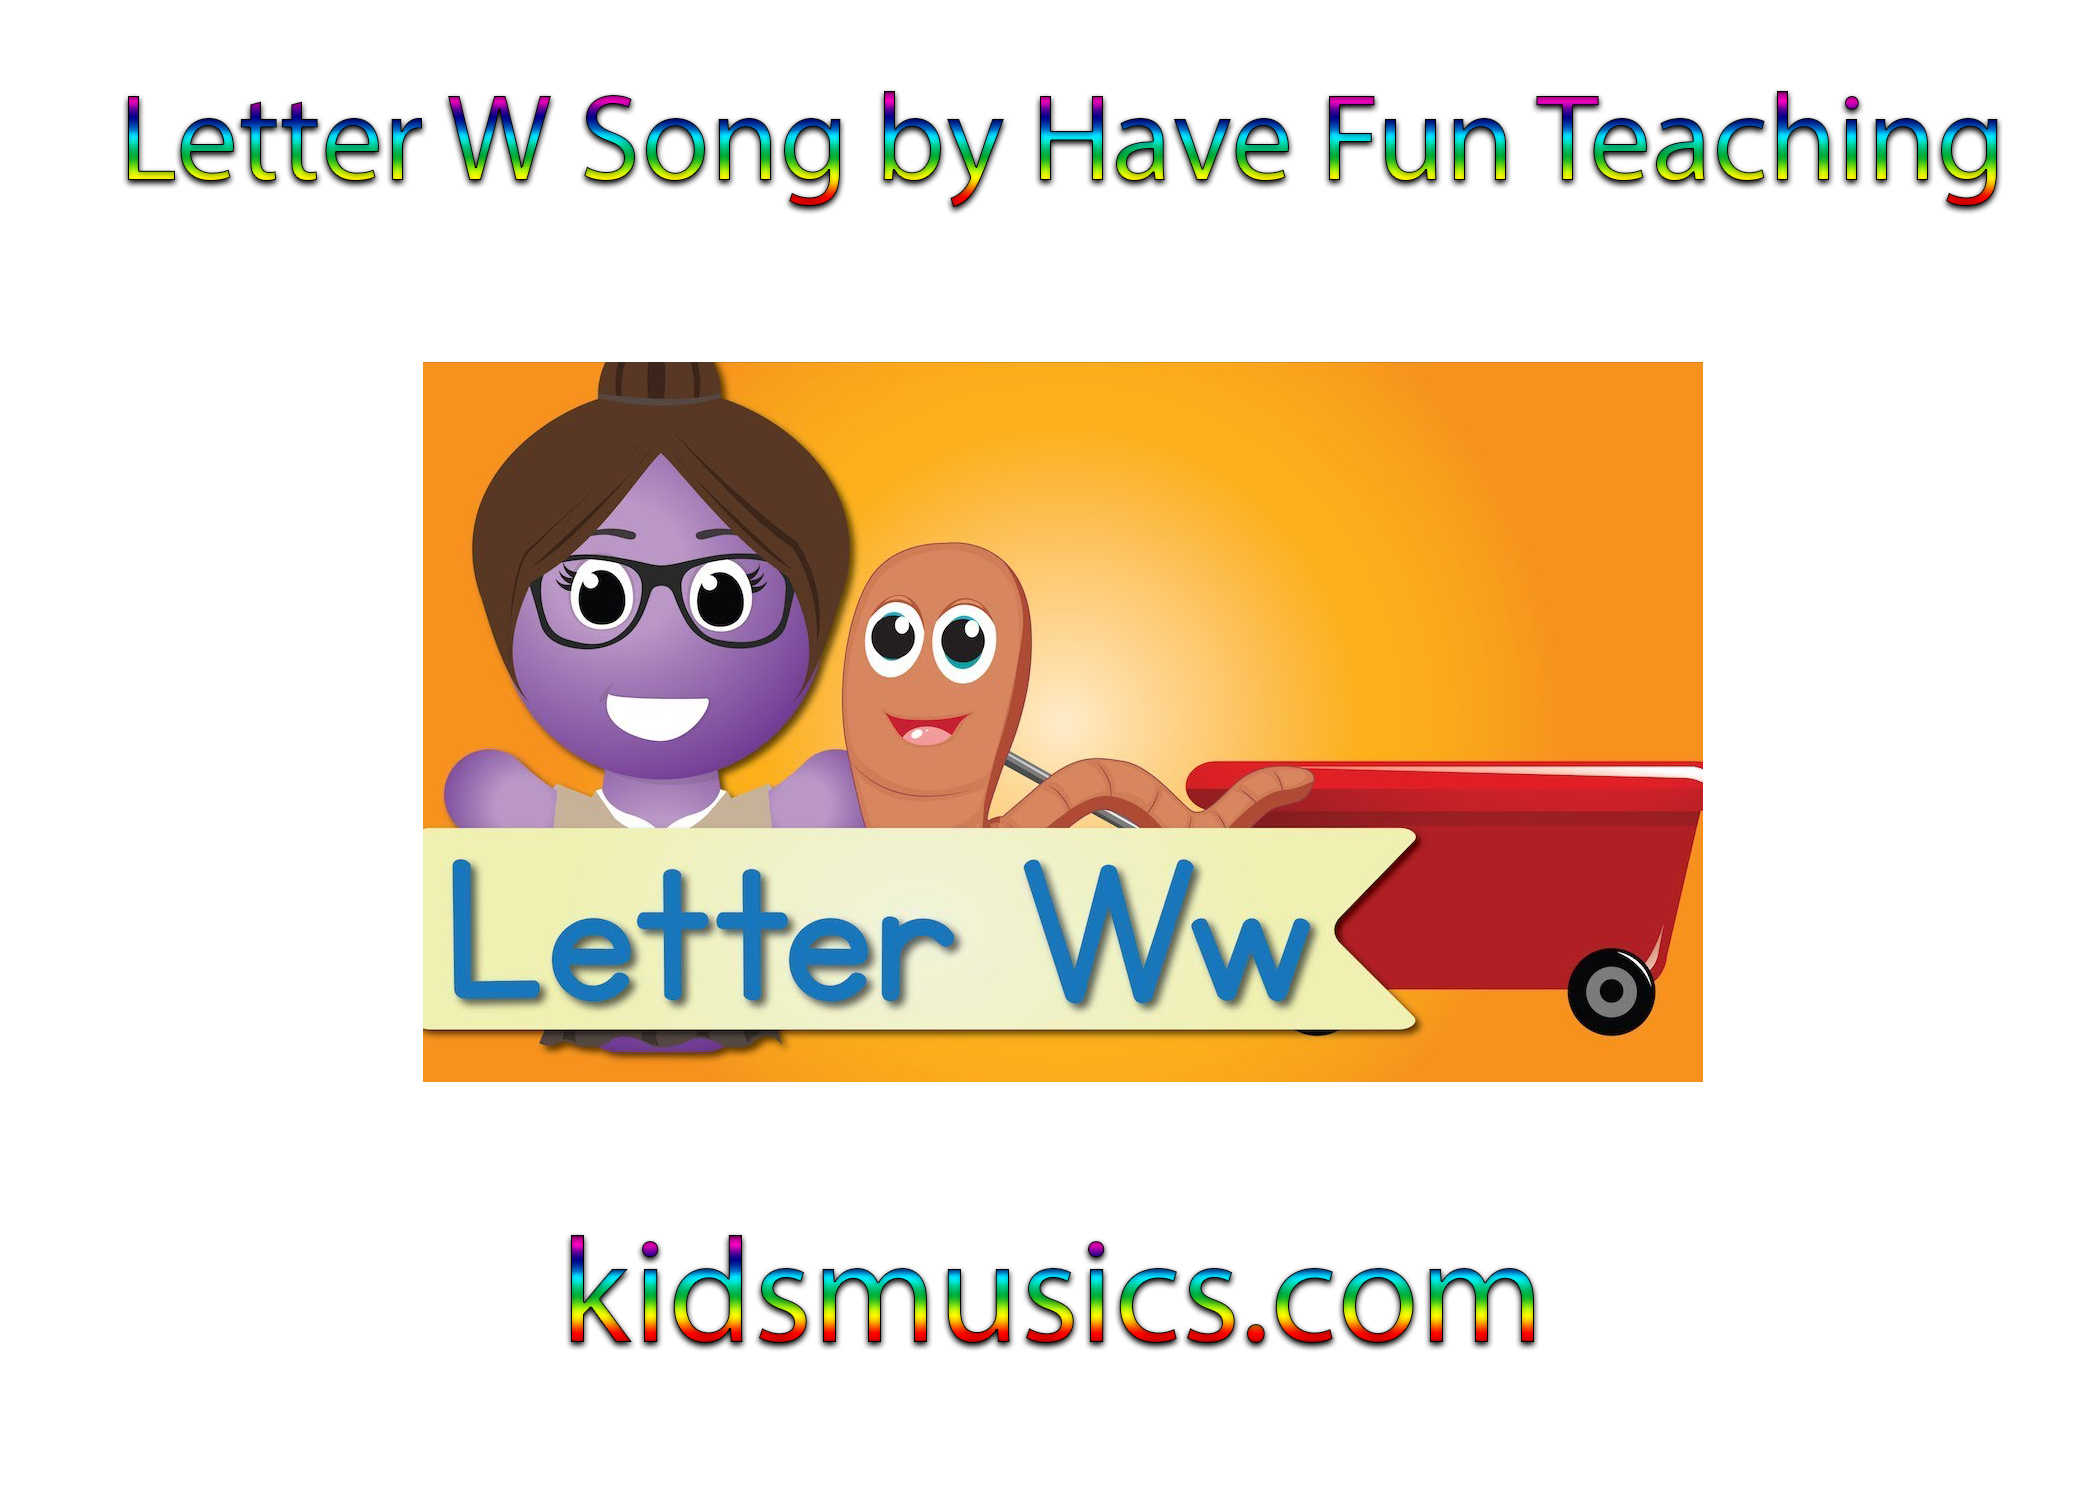 Letter W Song by Have Fun Teaching